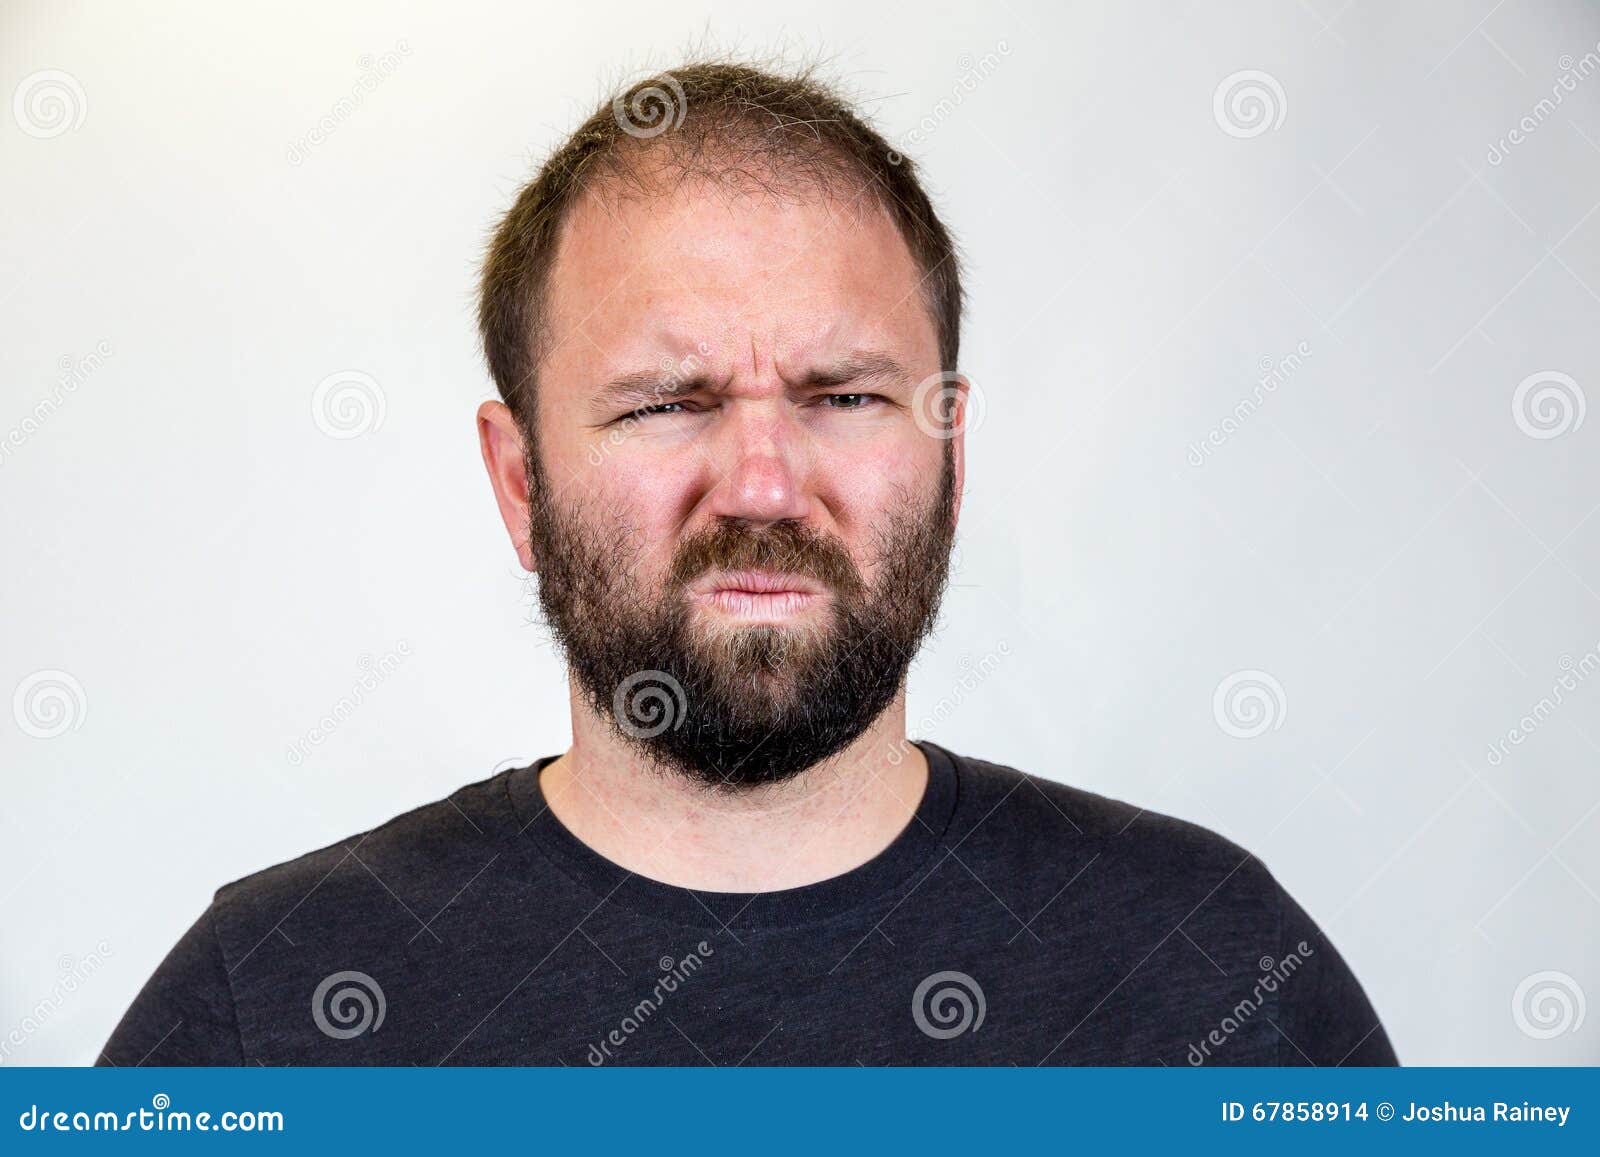 Man In Mid 30s Poses For Studio Portrait Stock Photo - Image of ...